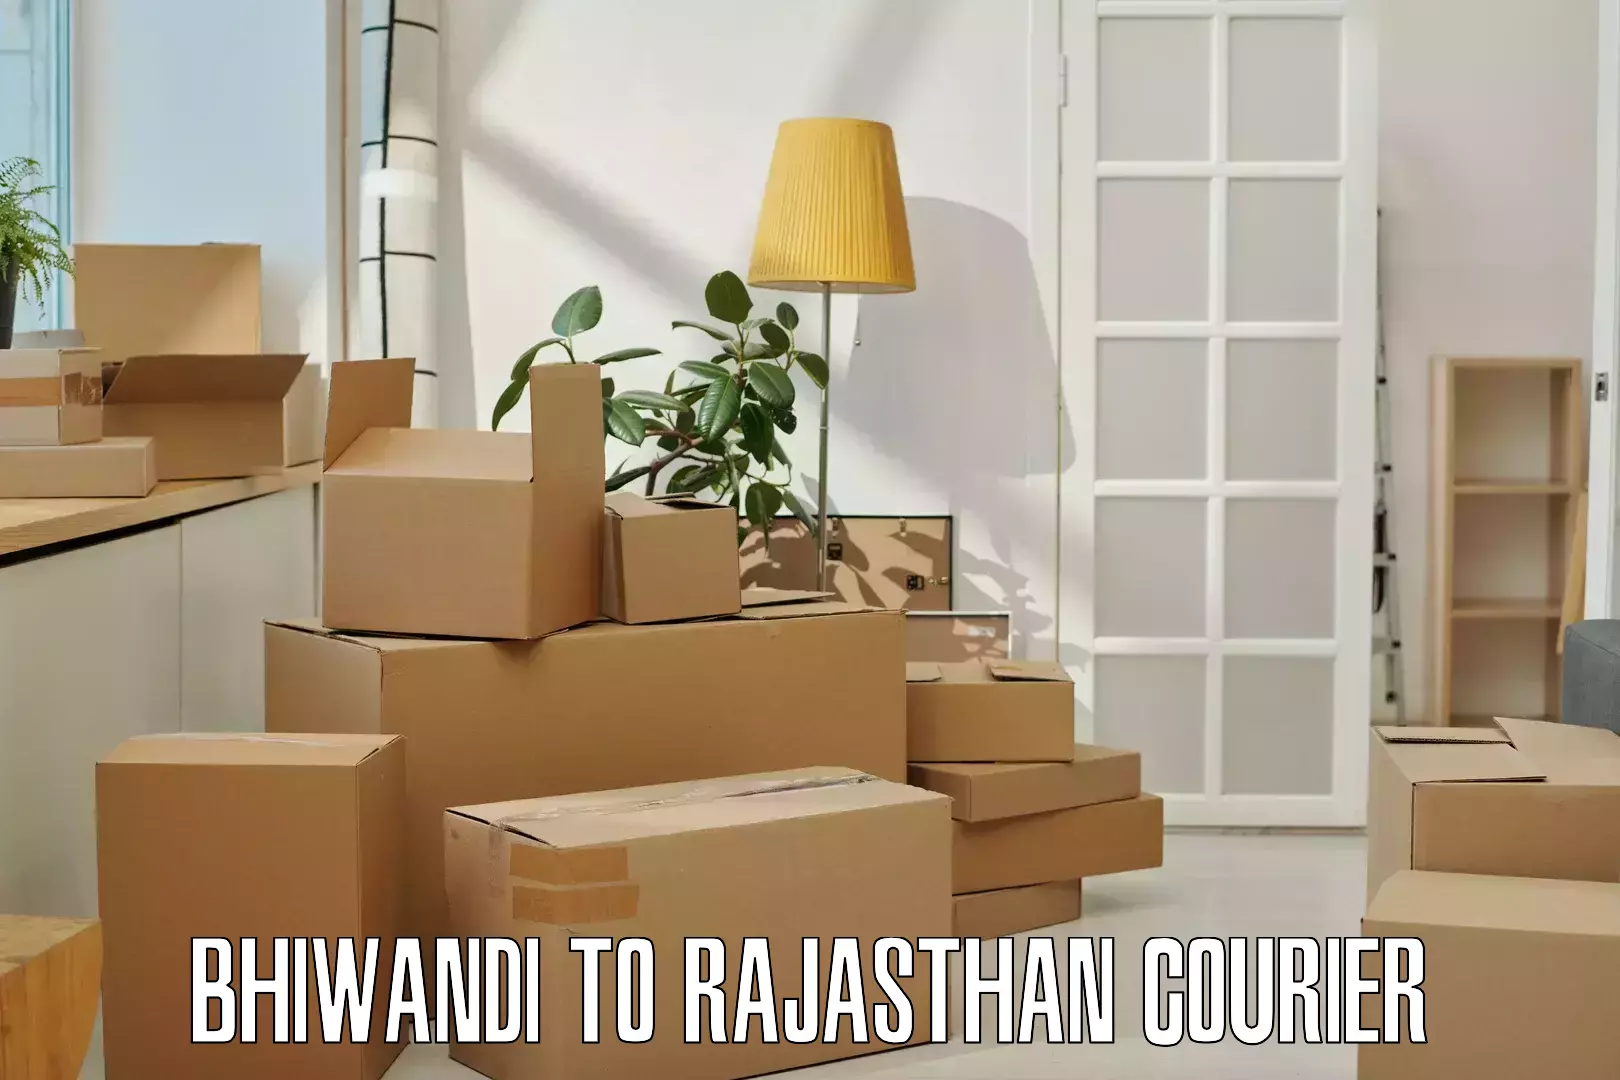 24-hour courier services Bhiwandi to Jaipur